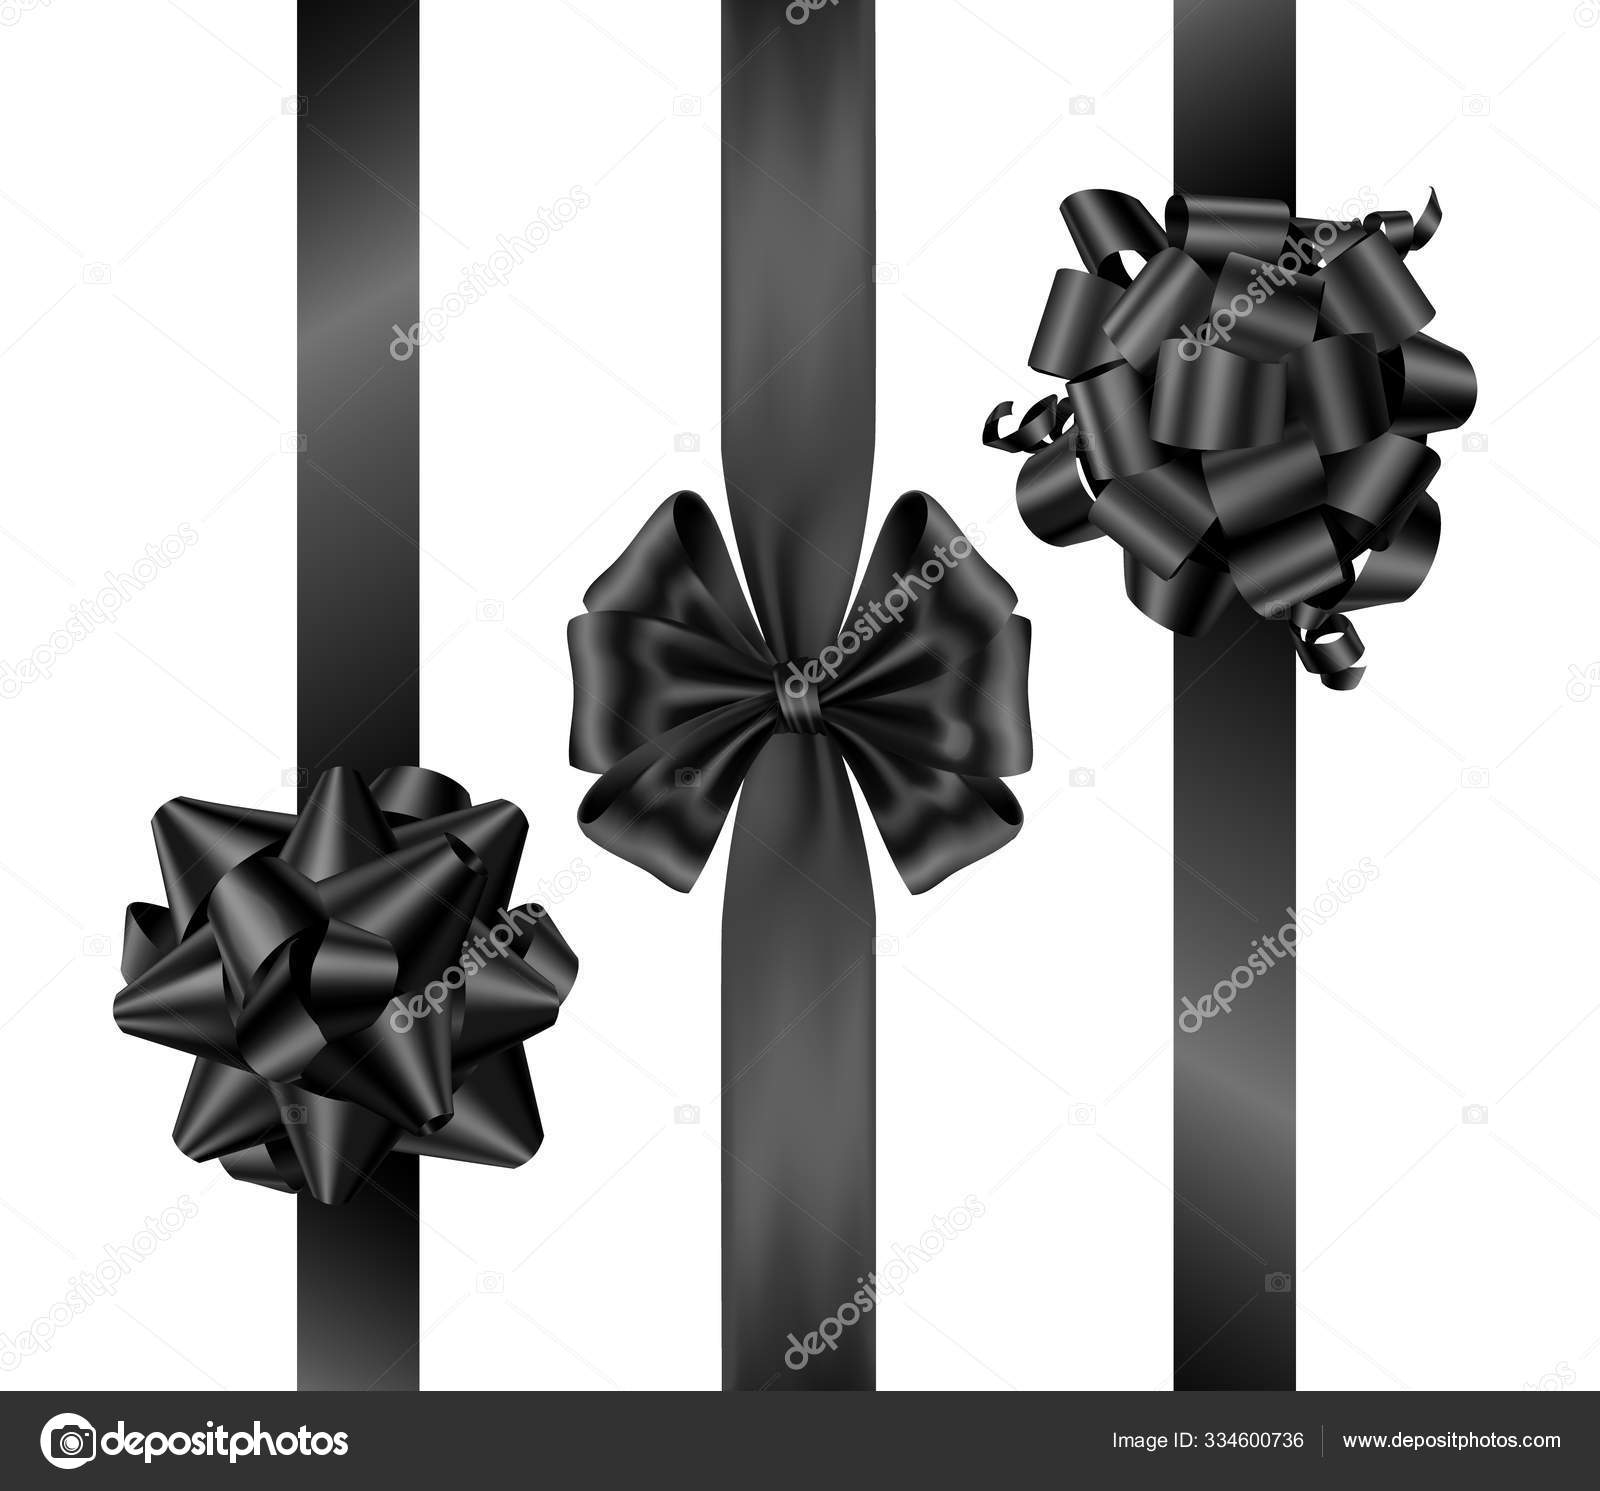 Cute red ribbons and bows top side view set Vector Image